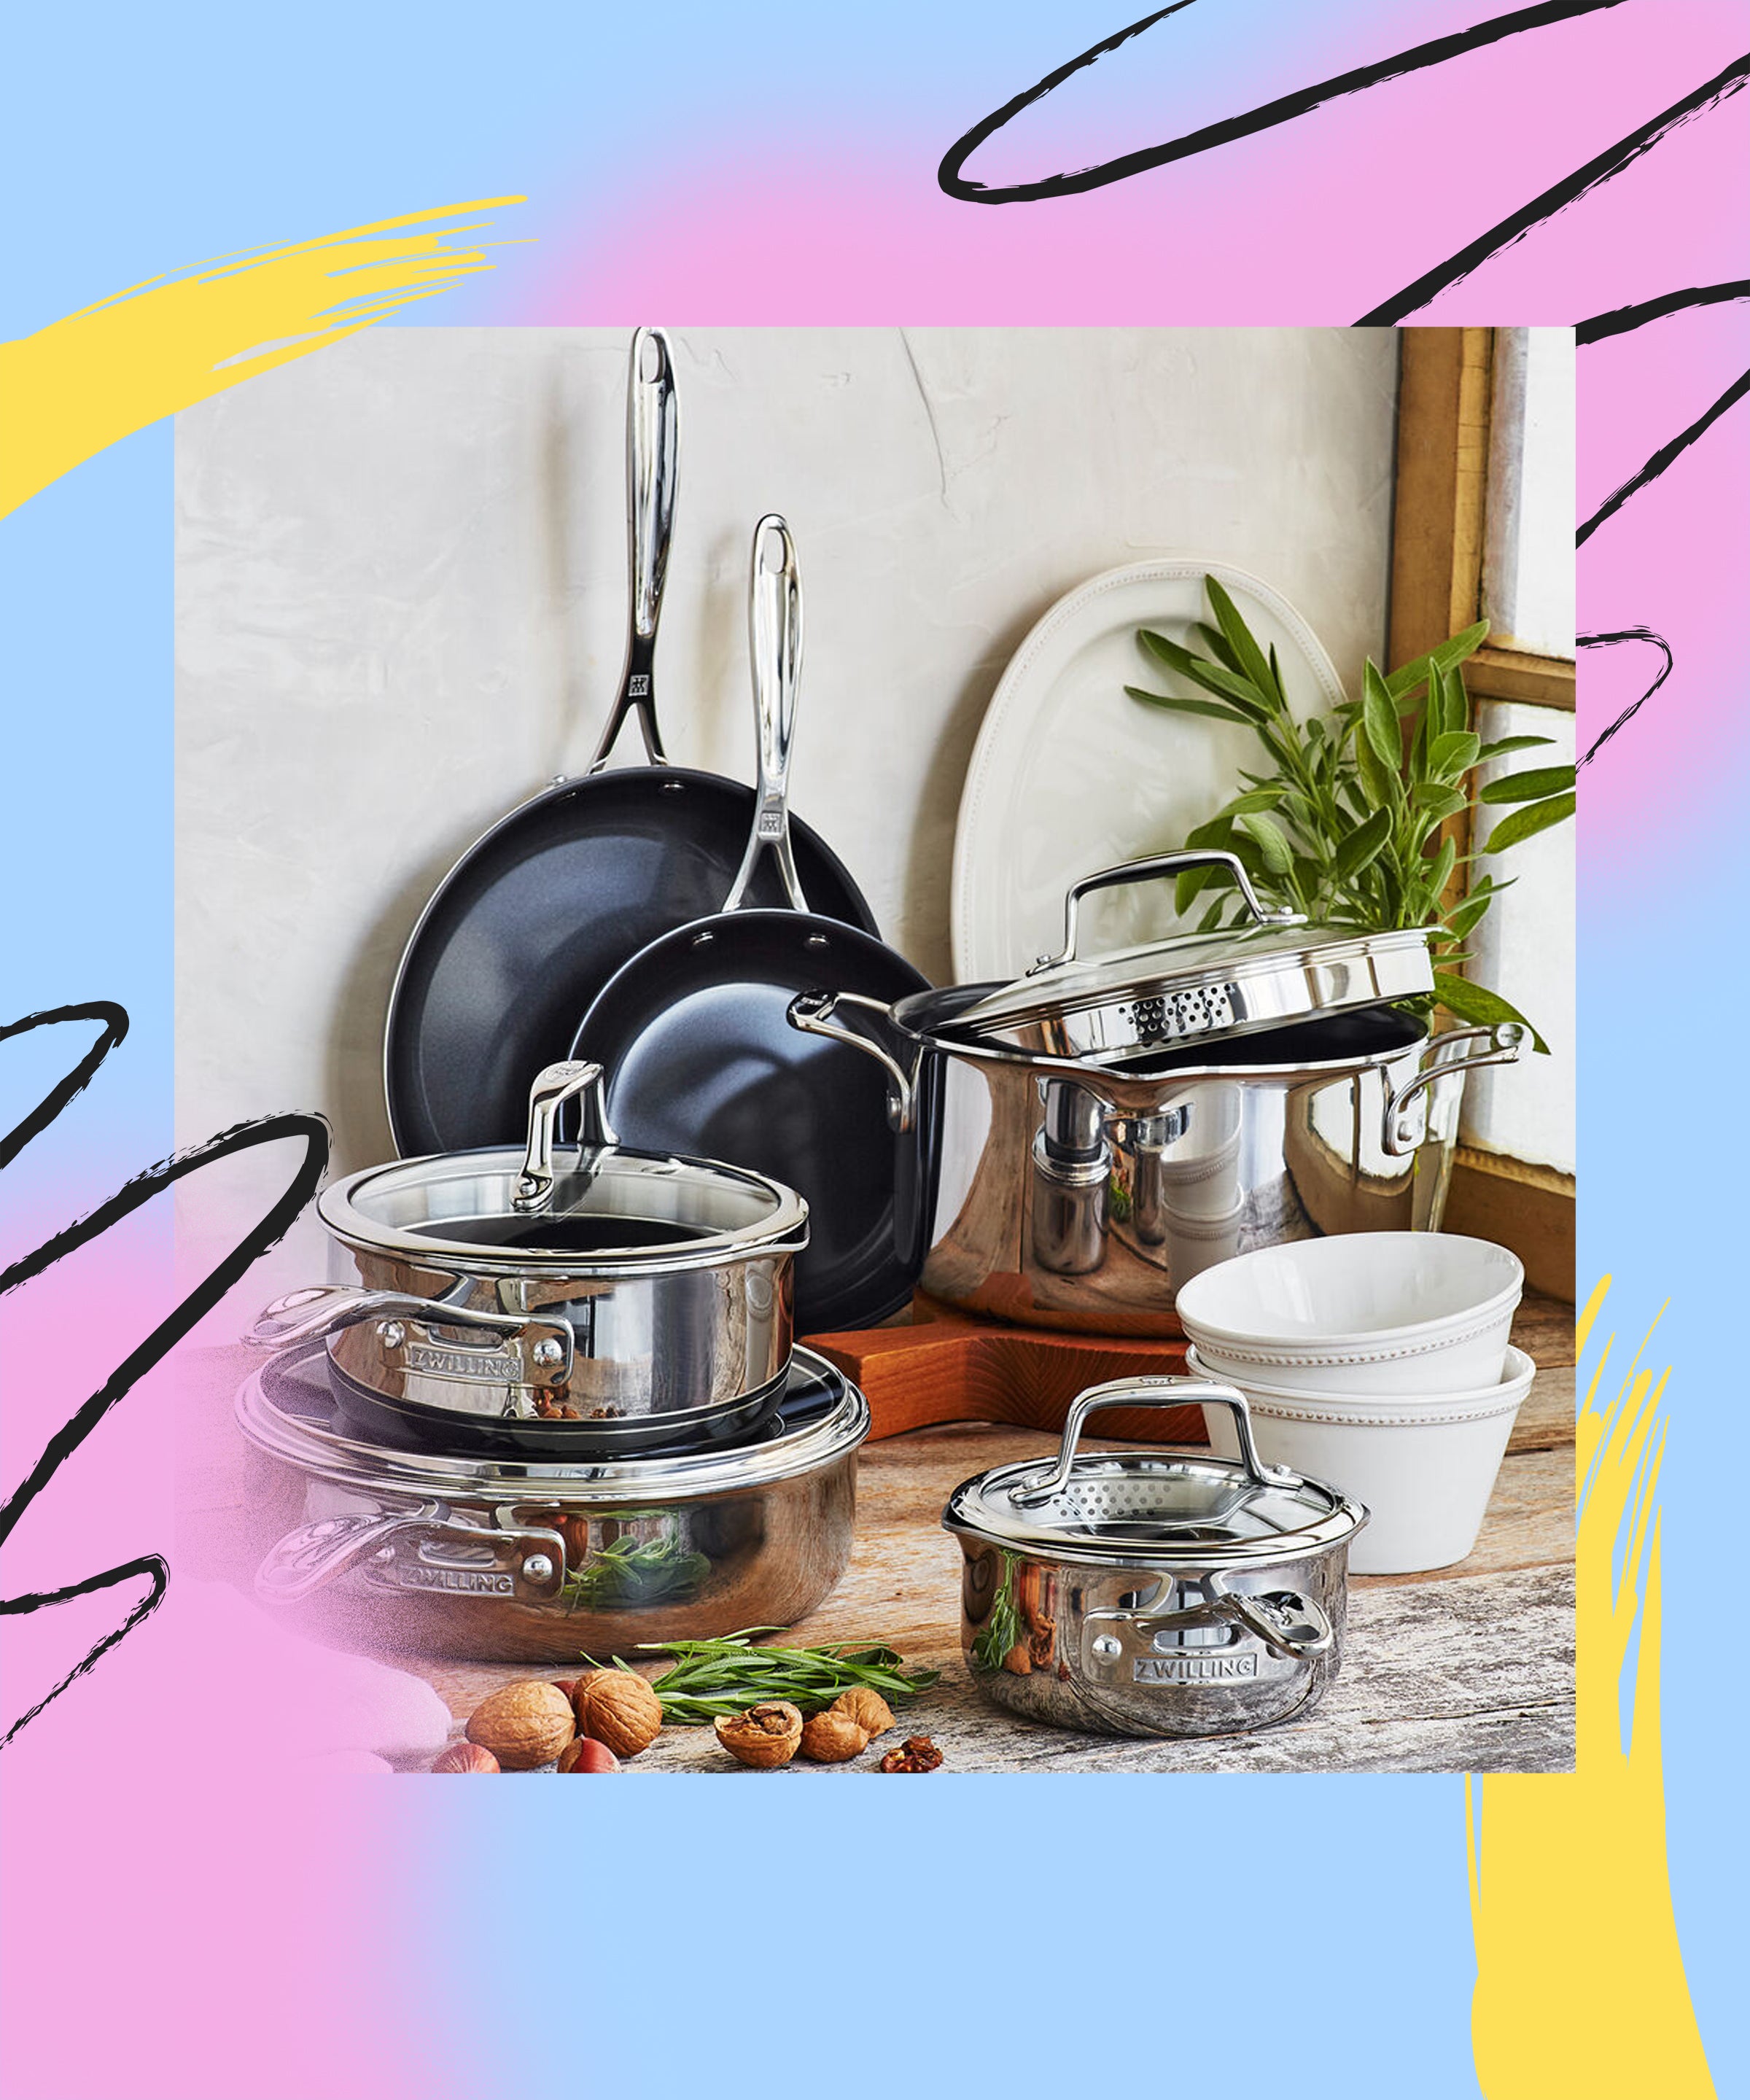 The Best Pots and Pans Set: Great Jones Cookware and Baking Sets